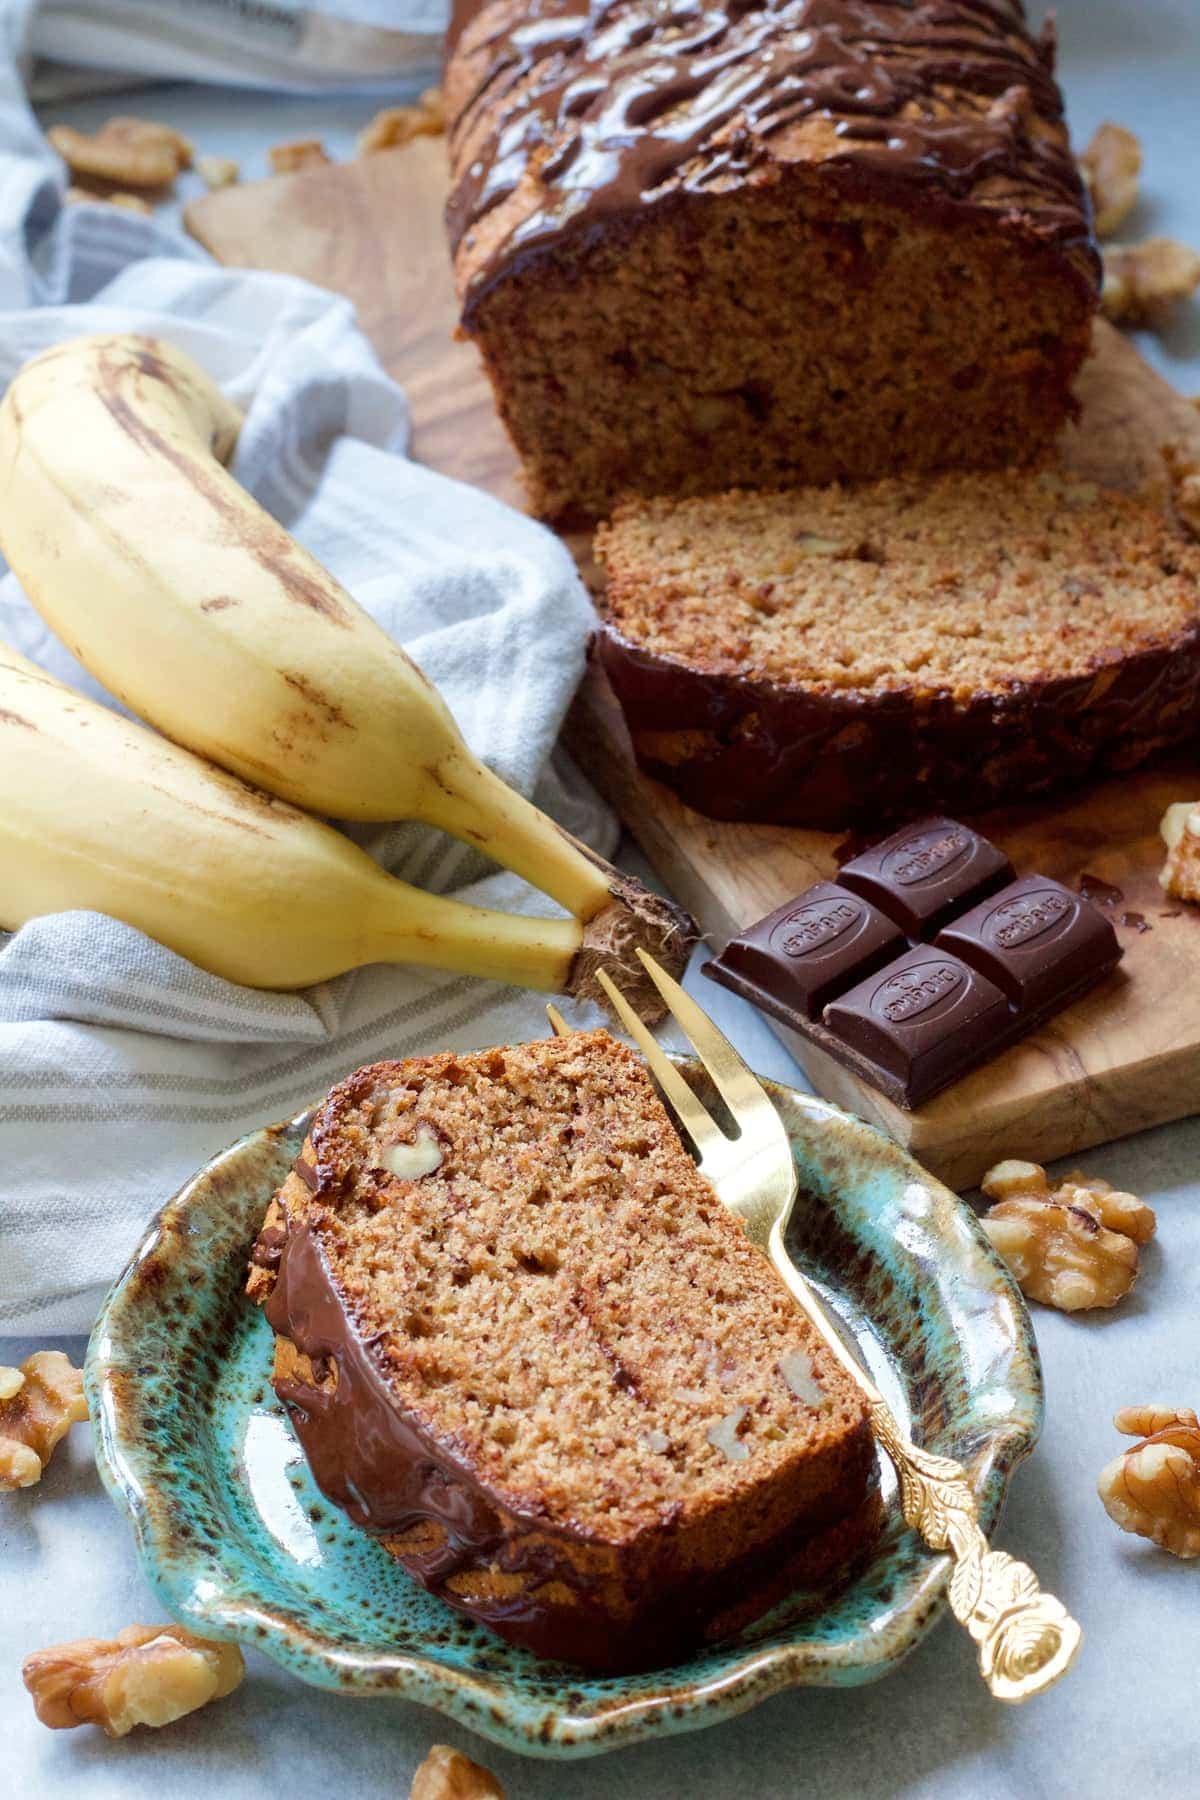 Banana loaf slice on a plate with loaf in the background.